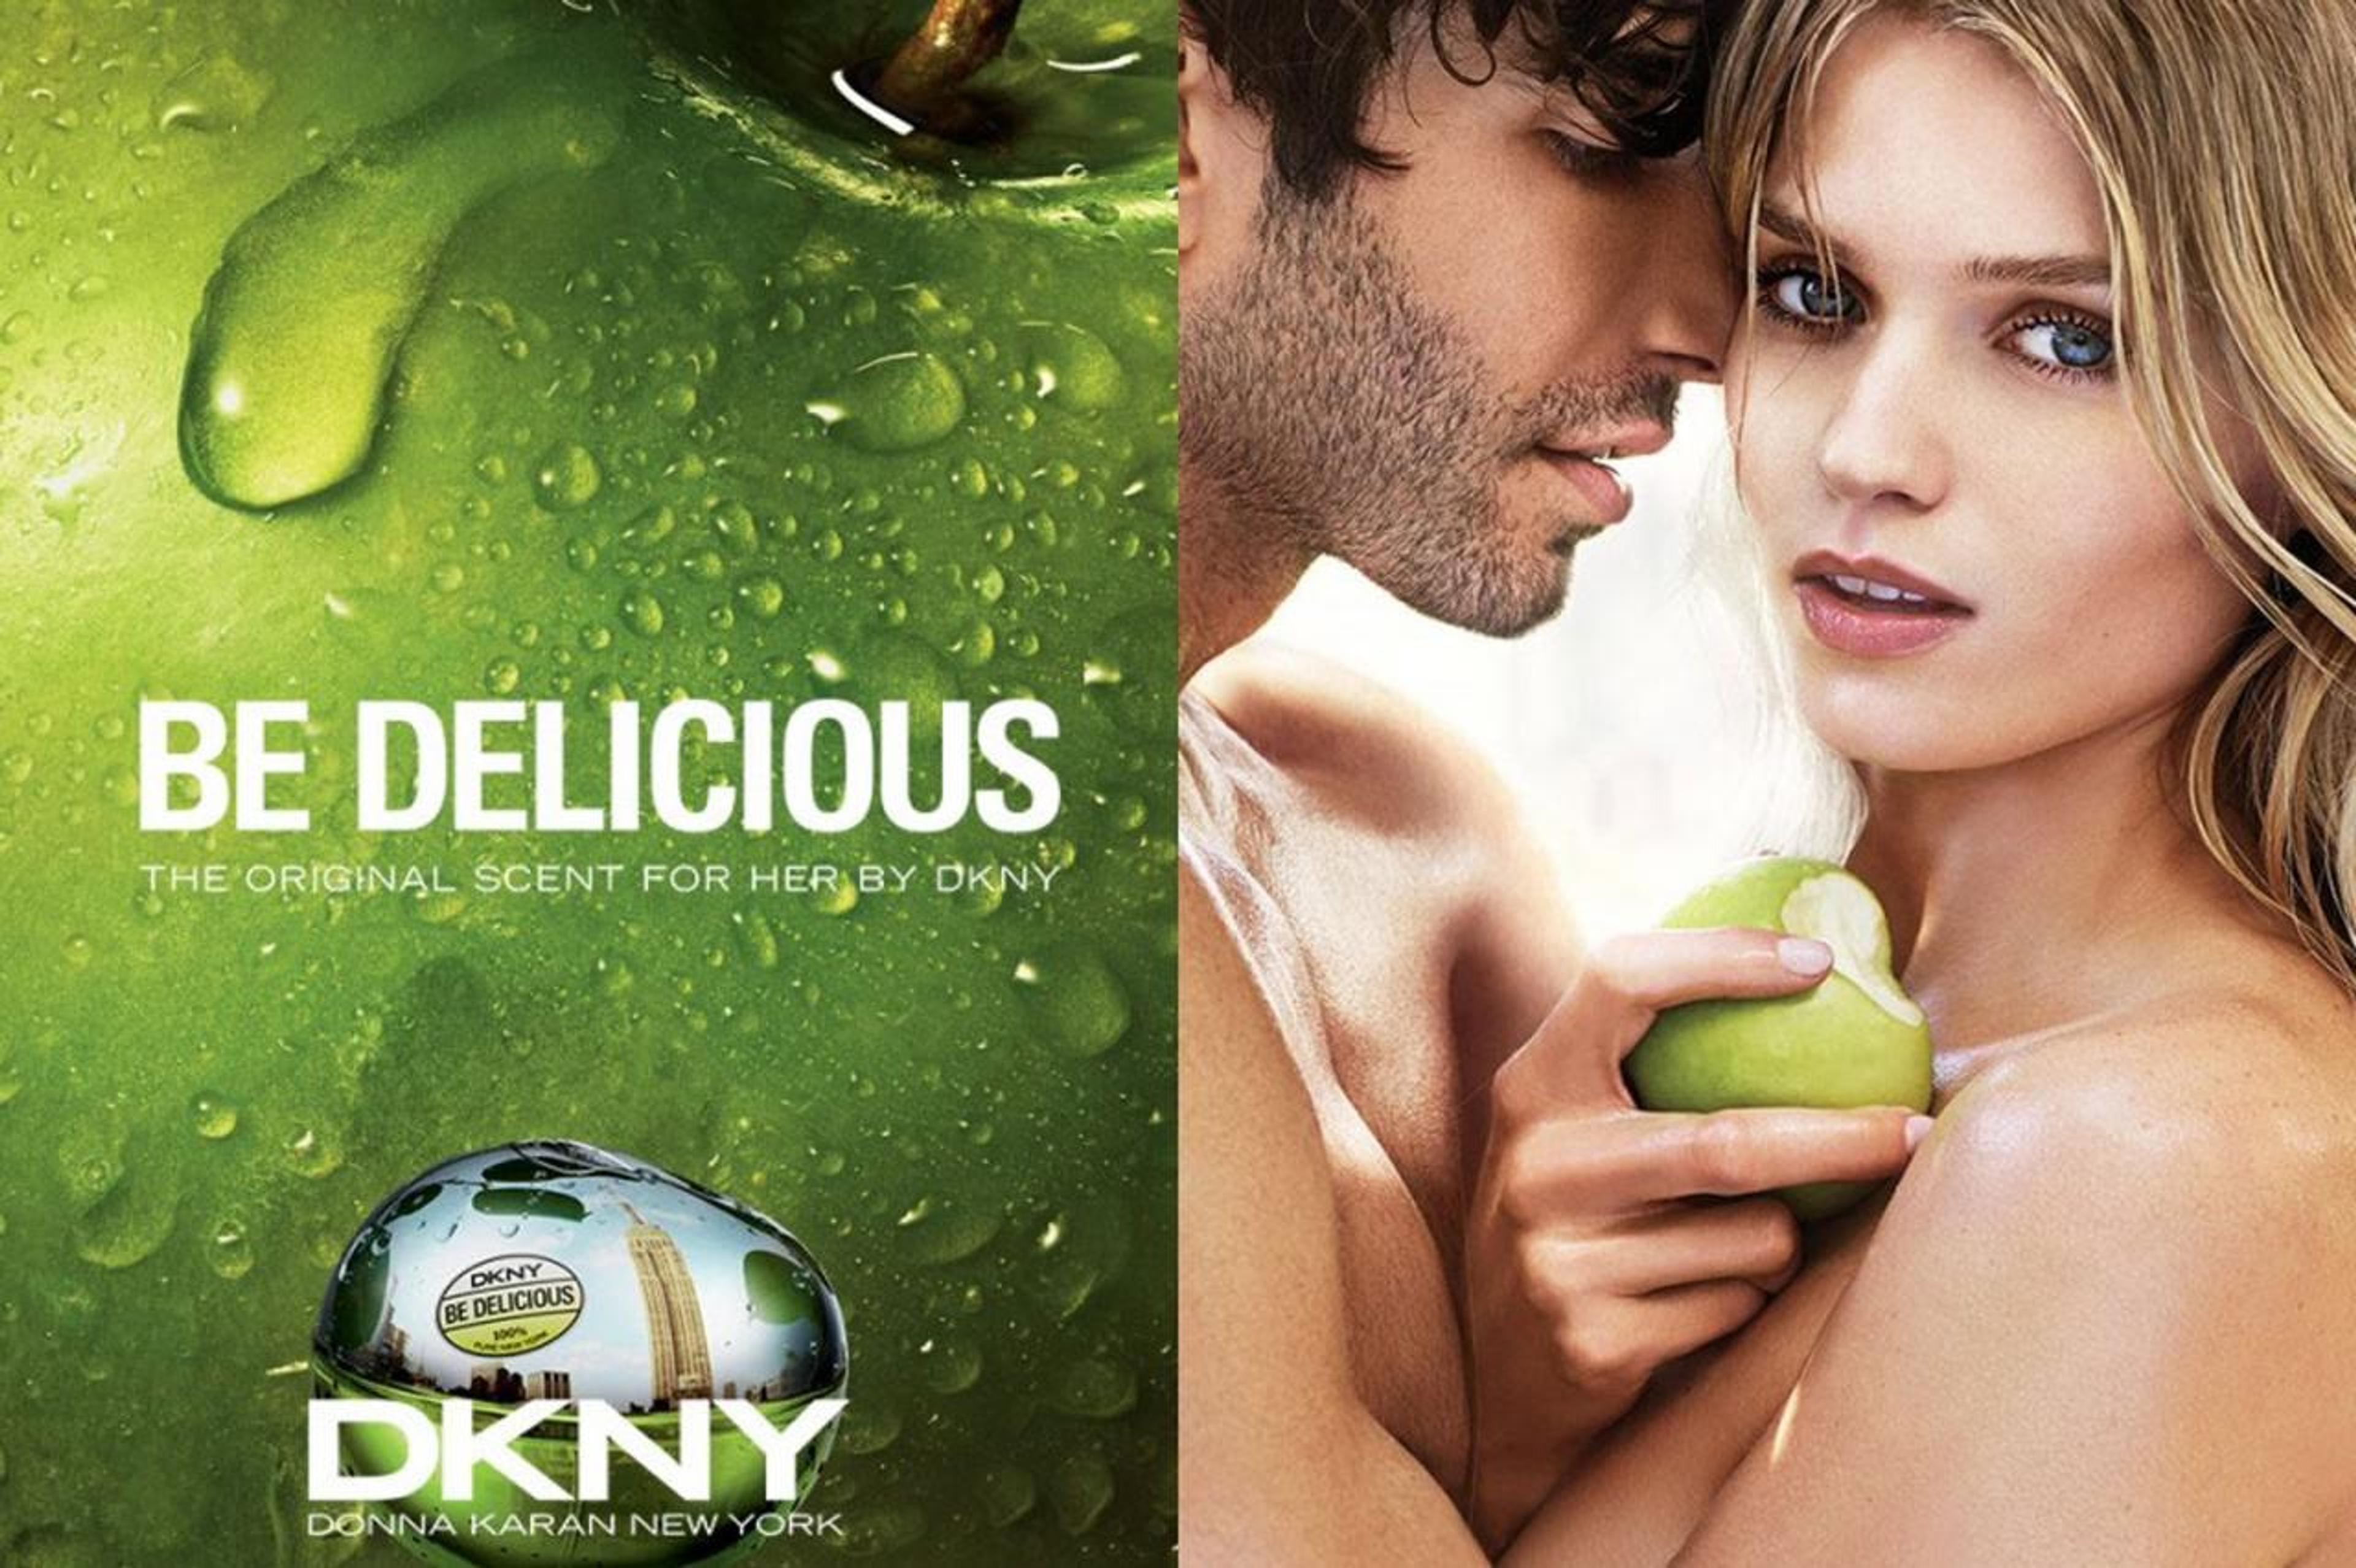 Advertisement for DKNY “Be Delicious” perfume, 2015